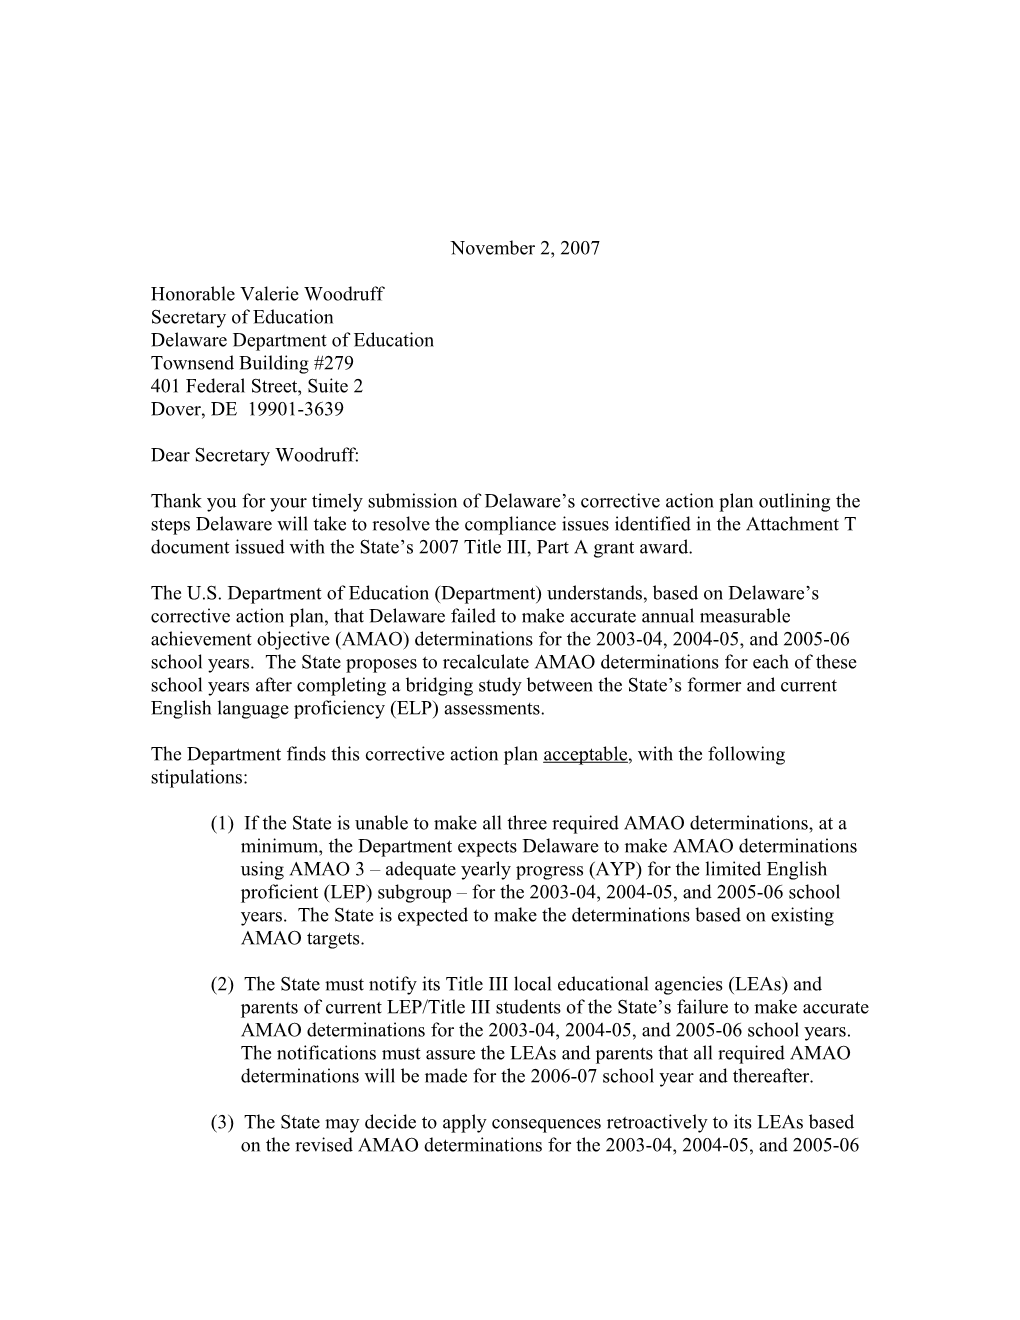 Letter Regarding the Title III, Part a Grant Award Made to Delaware MS Word